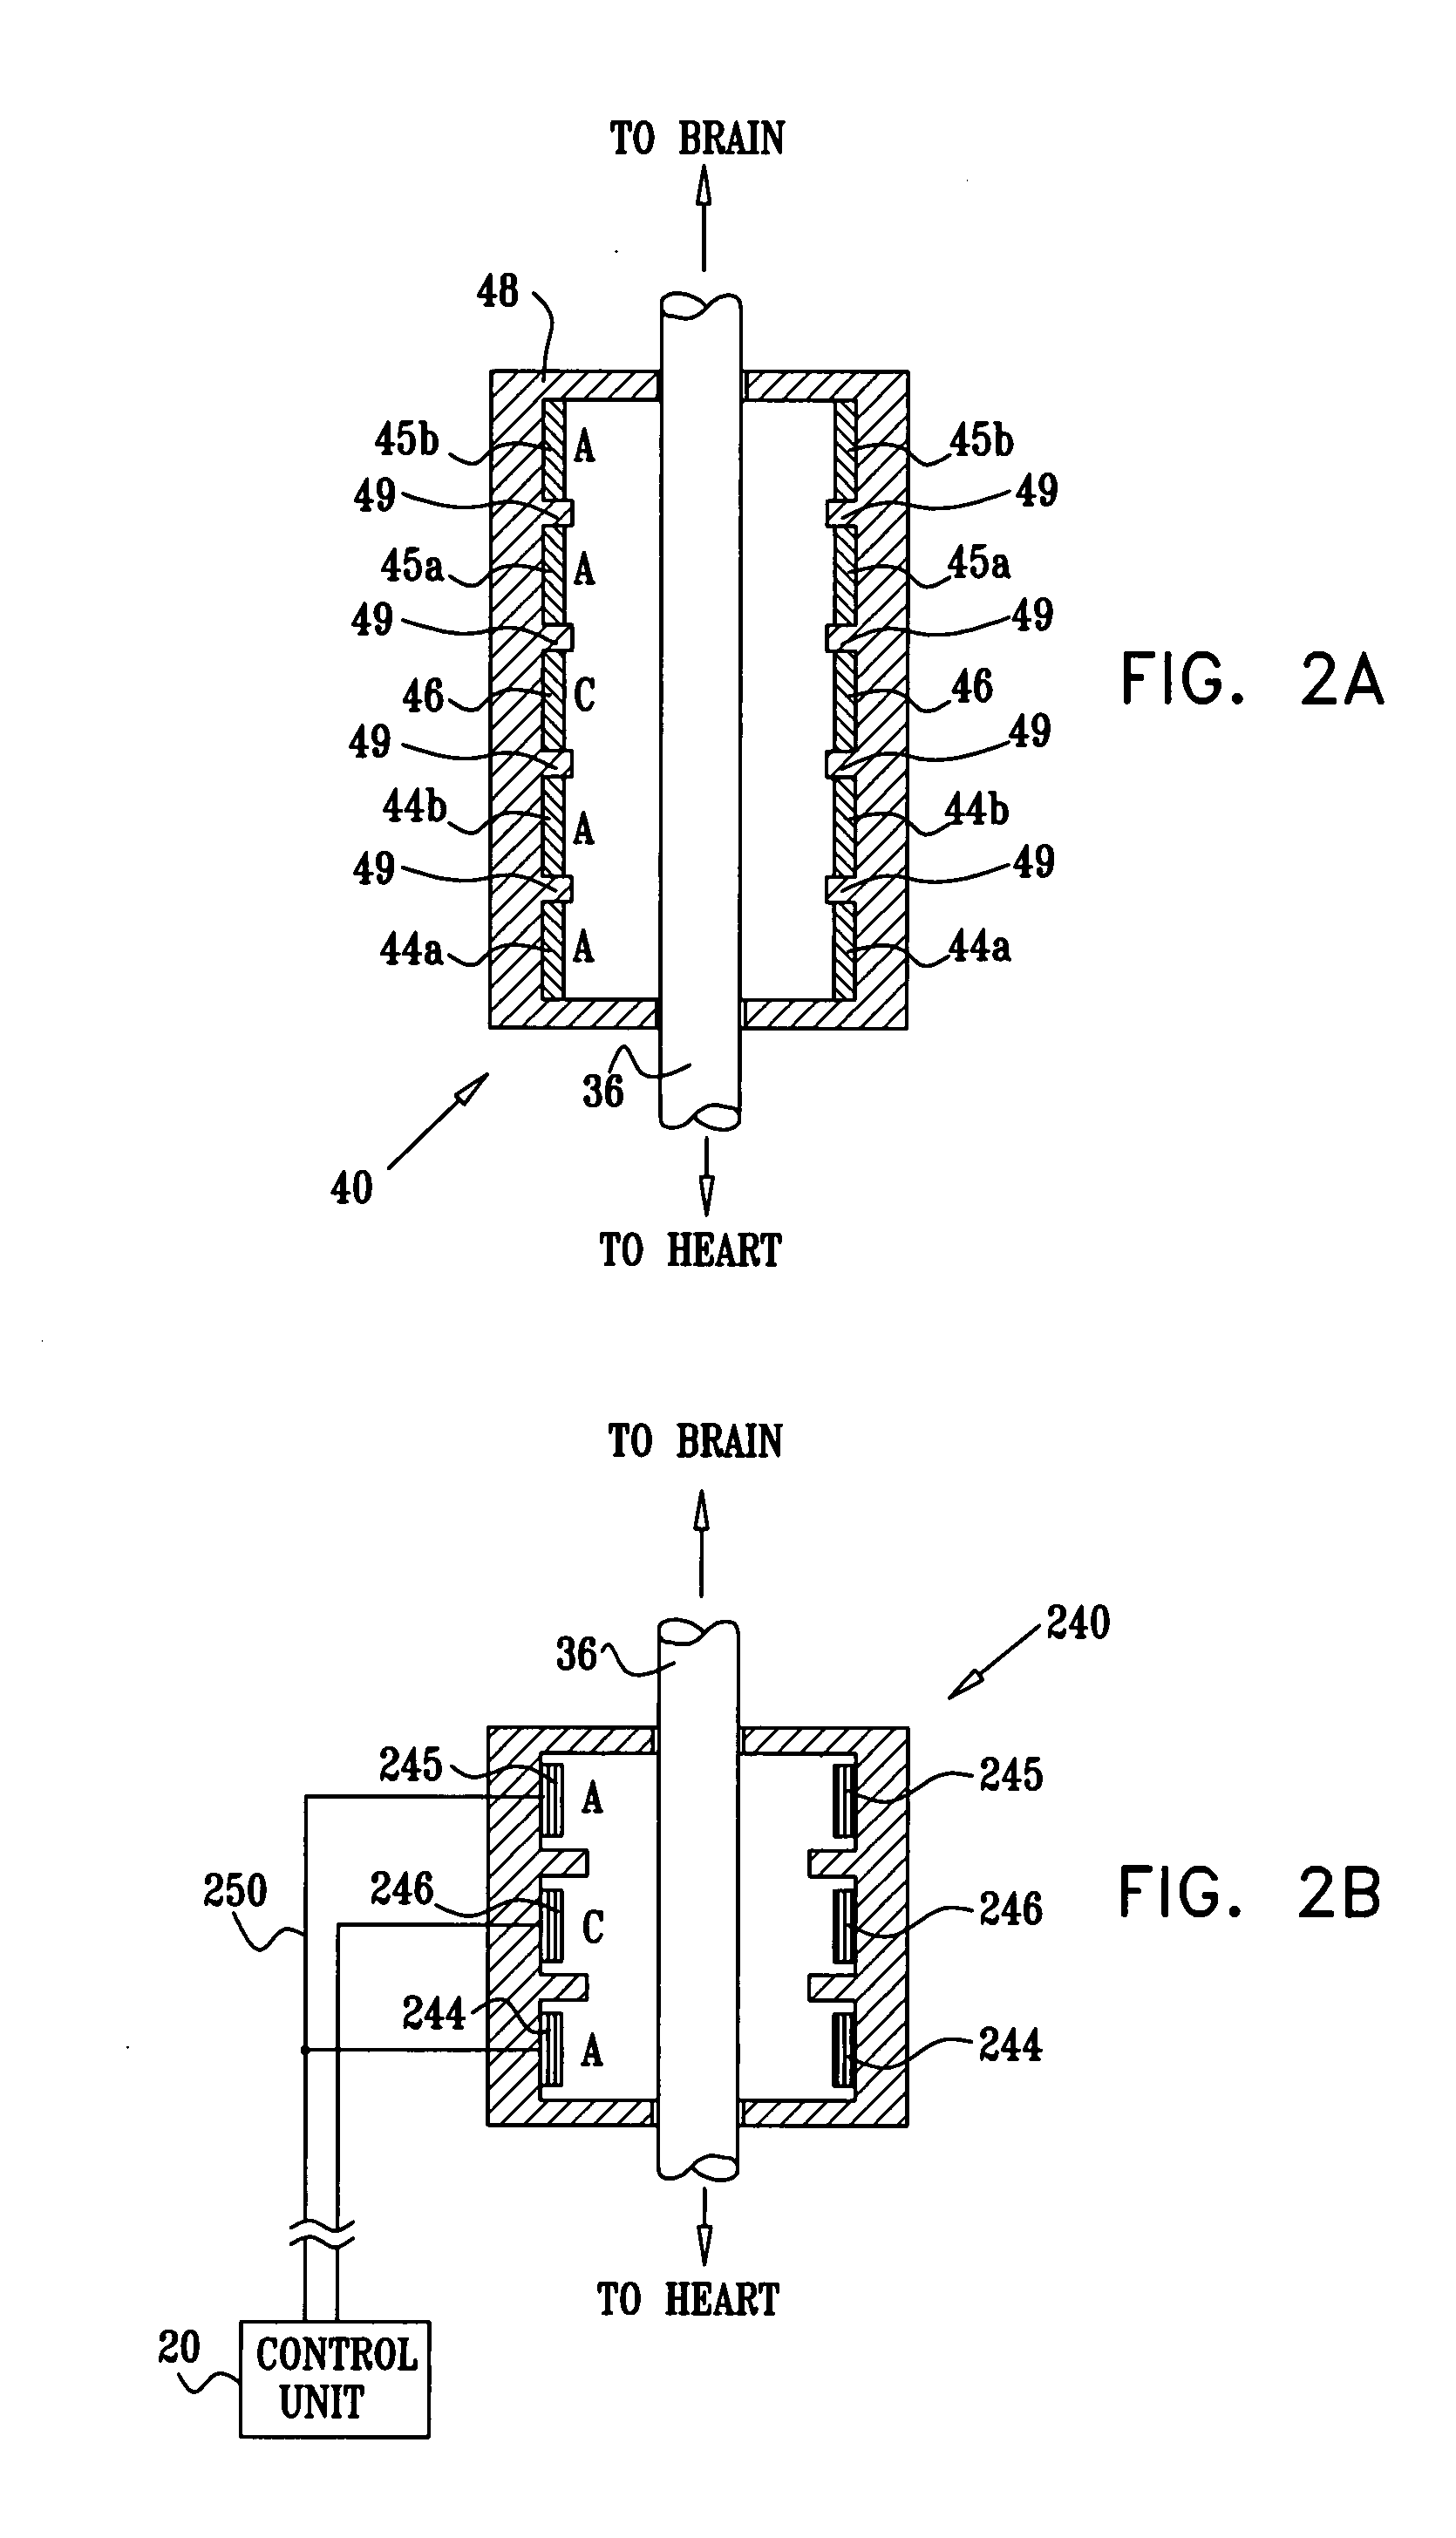 Method for surgically implanting an electrode device